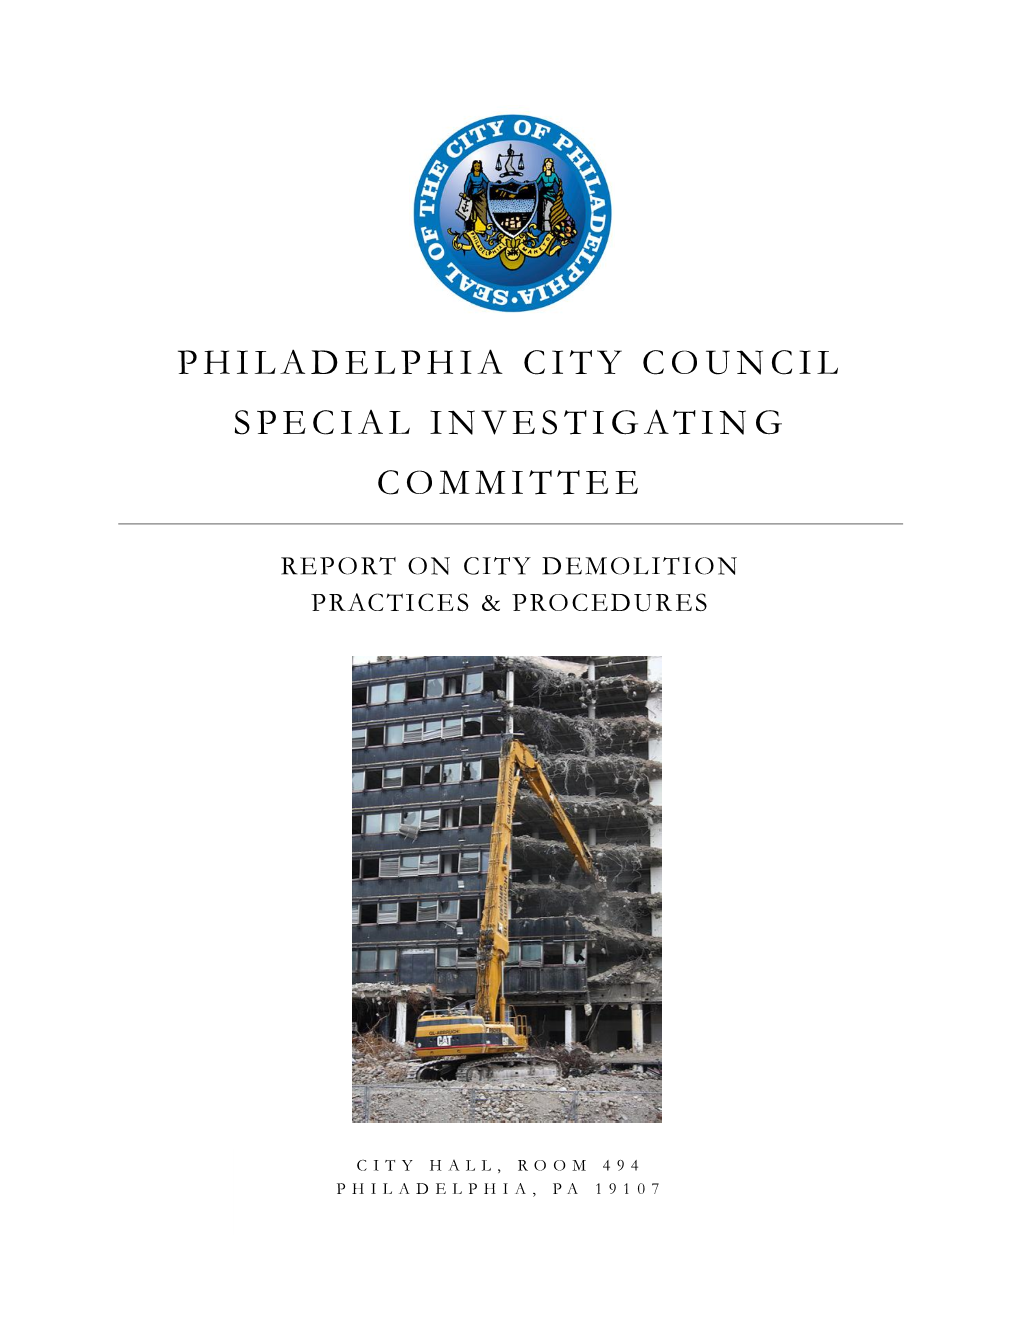 Special Investigating Committee on Demolition Practices in the City of Philadelphia